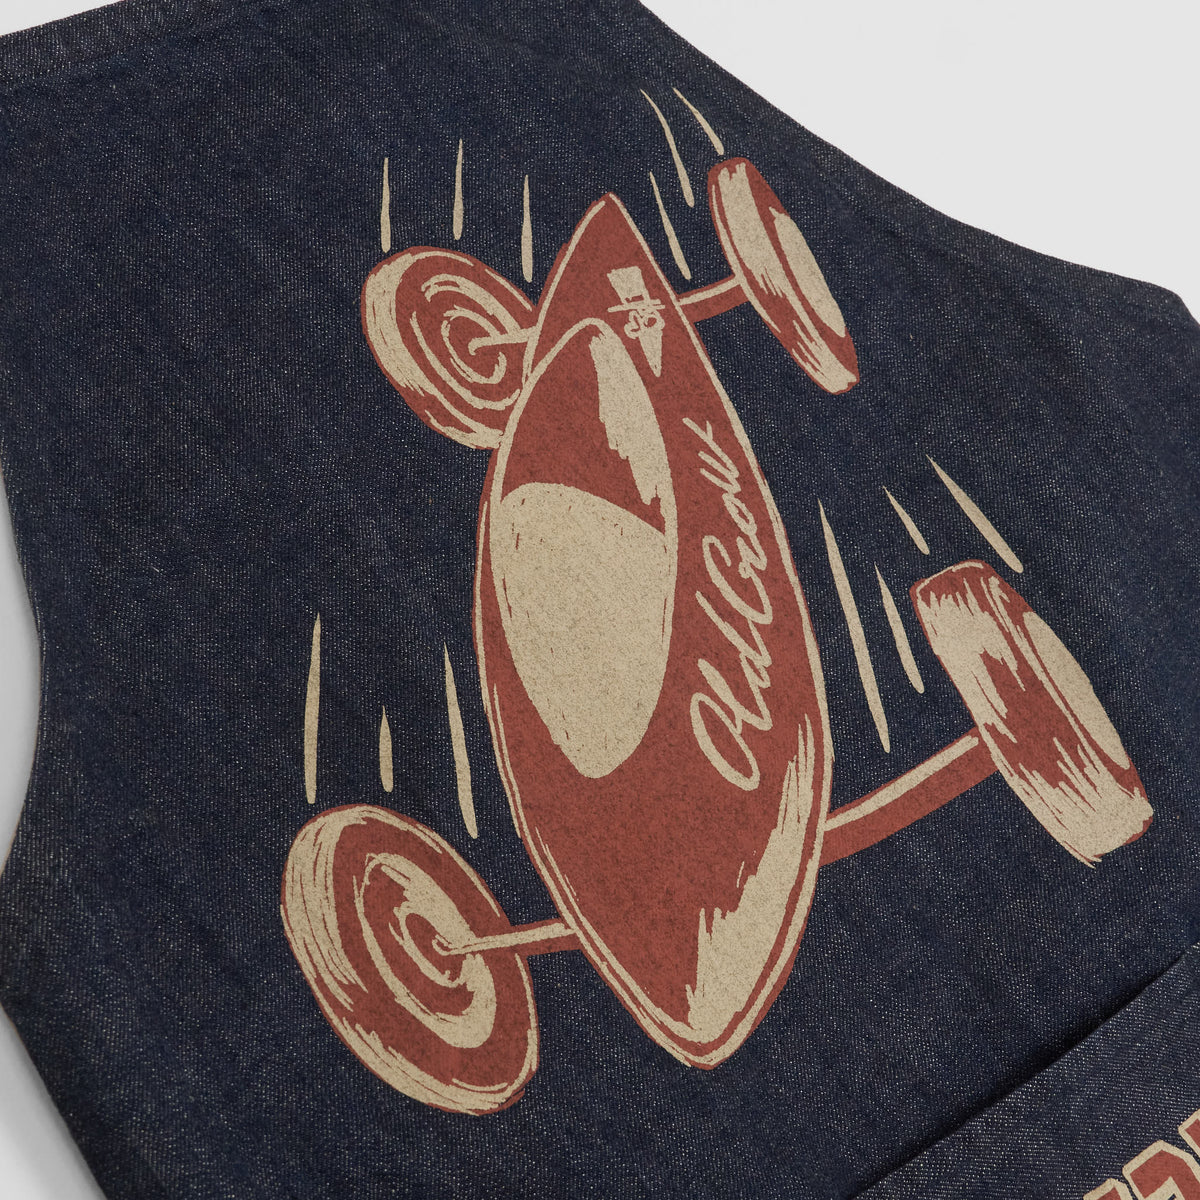 Old Crow Speed Shop by Glad Hand &amp; Co. Apron